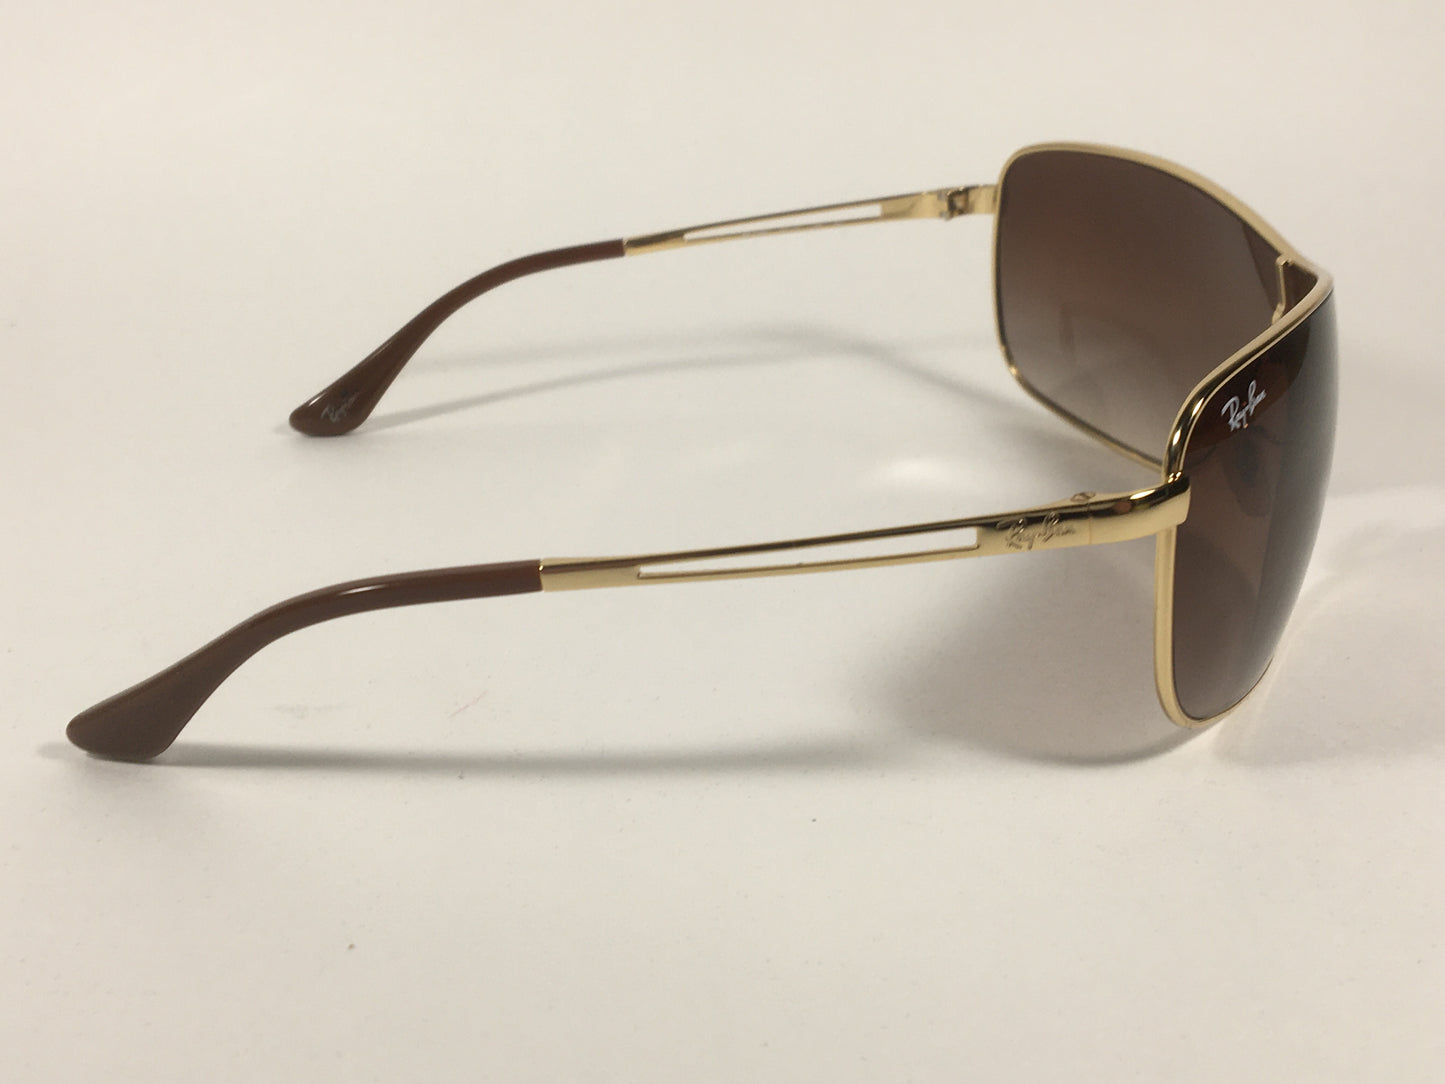 Ray-Ban RB3466 001/13 Shield Sunglasses Gold Metal Frame Brown Gradient Lens - Sunglasses